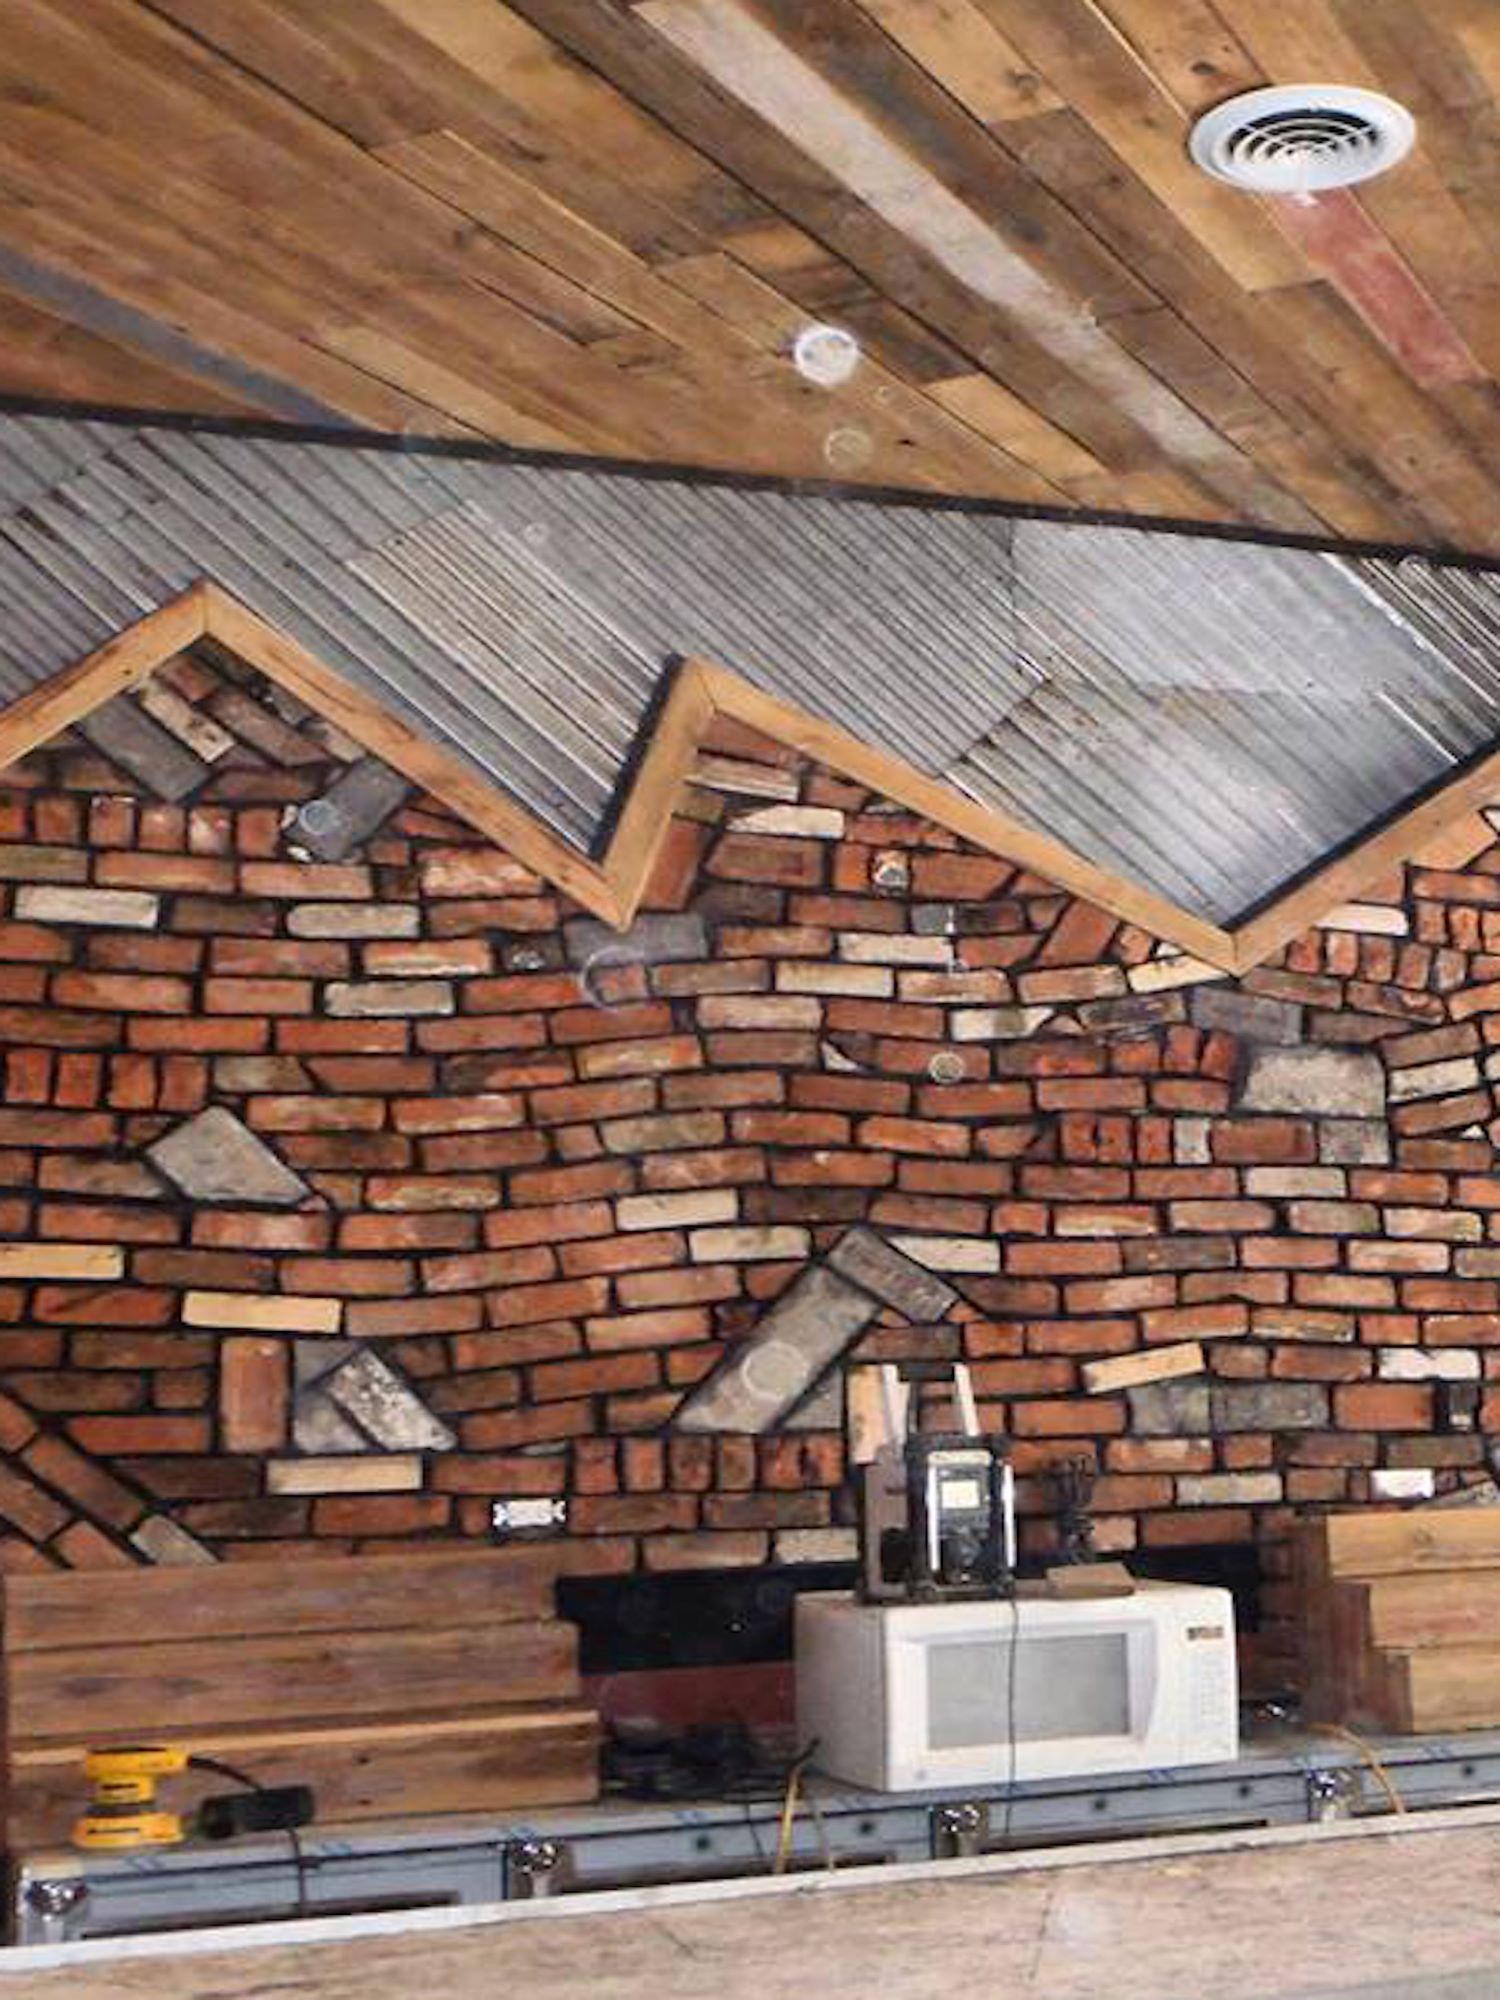 An accent wall in a local barbeque restaurant